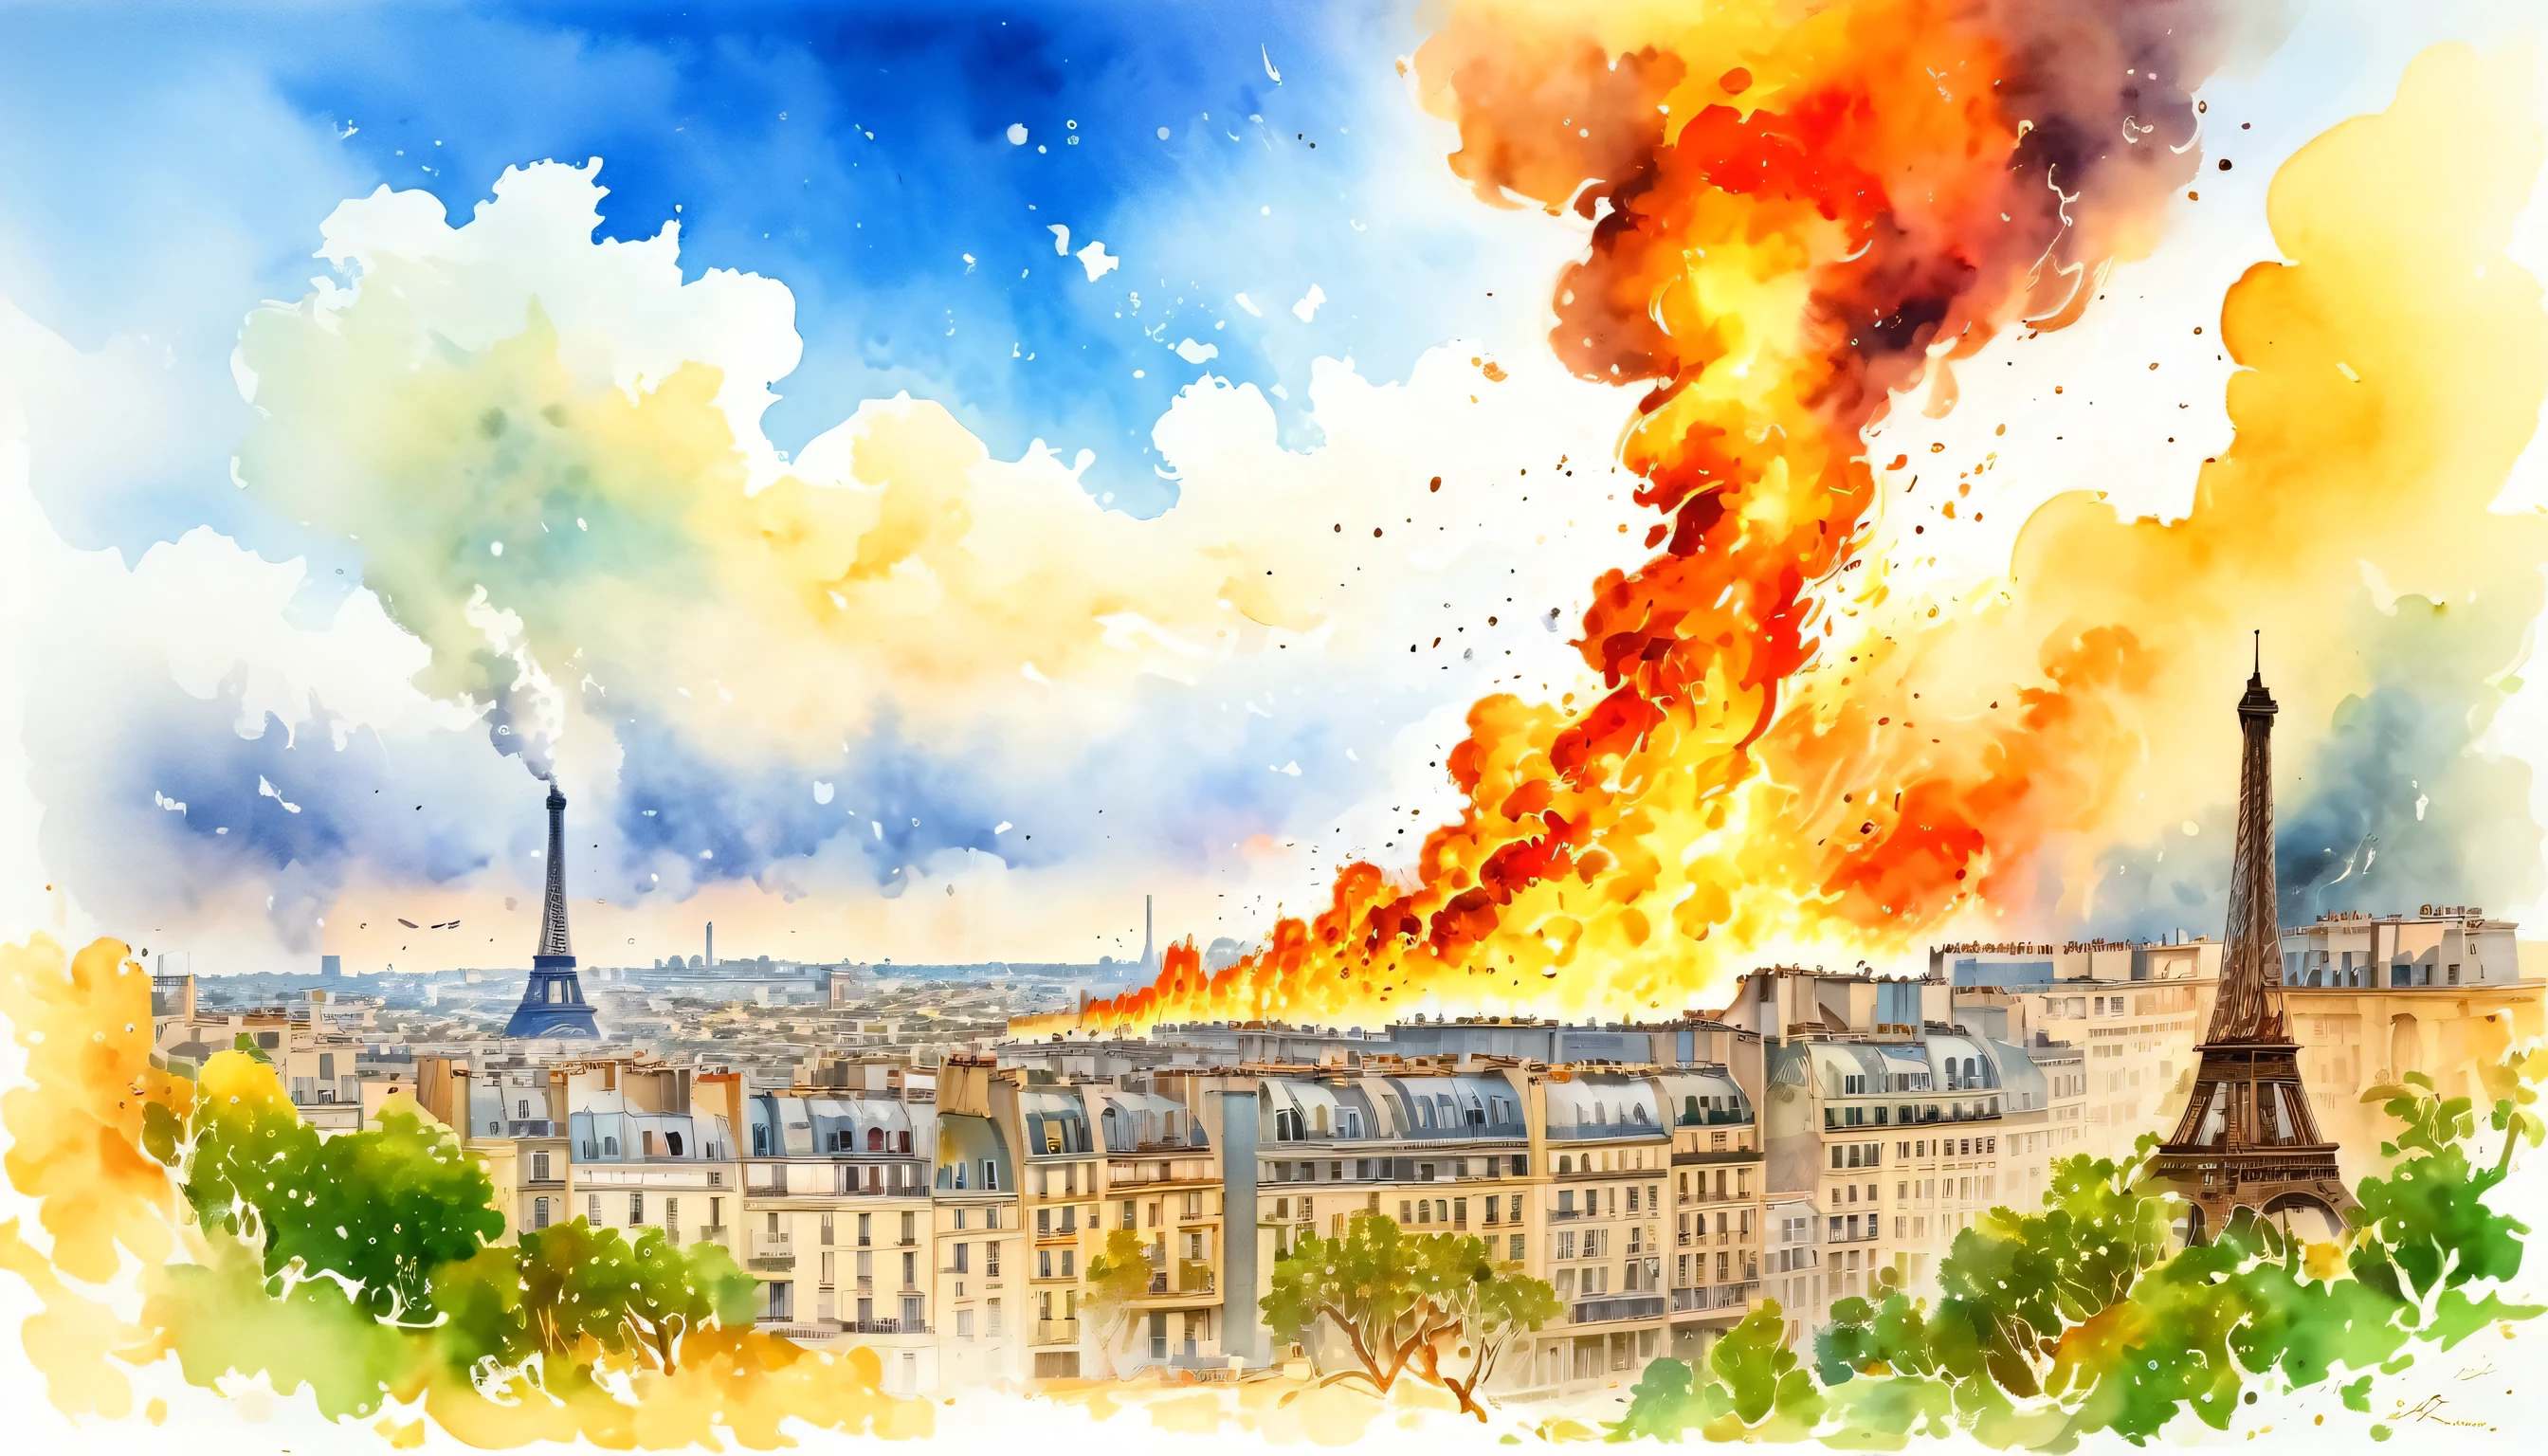 post Apocalyptic scene, Paris, Eiffel Tower on fire, buildings engulfed in flames, emitting smoke, sky filled with clouds, smoke, scenery, fire, ruins, cityscape, explosion, destruction, modern art, painting, drawing, watercolor, psychedelic colors